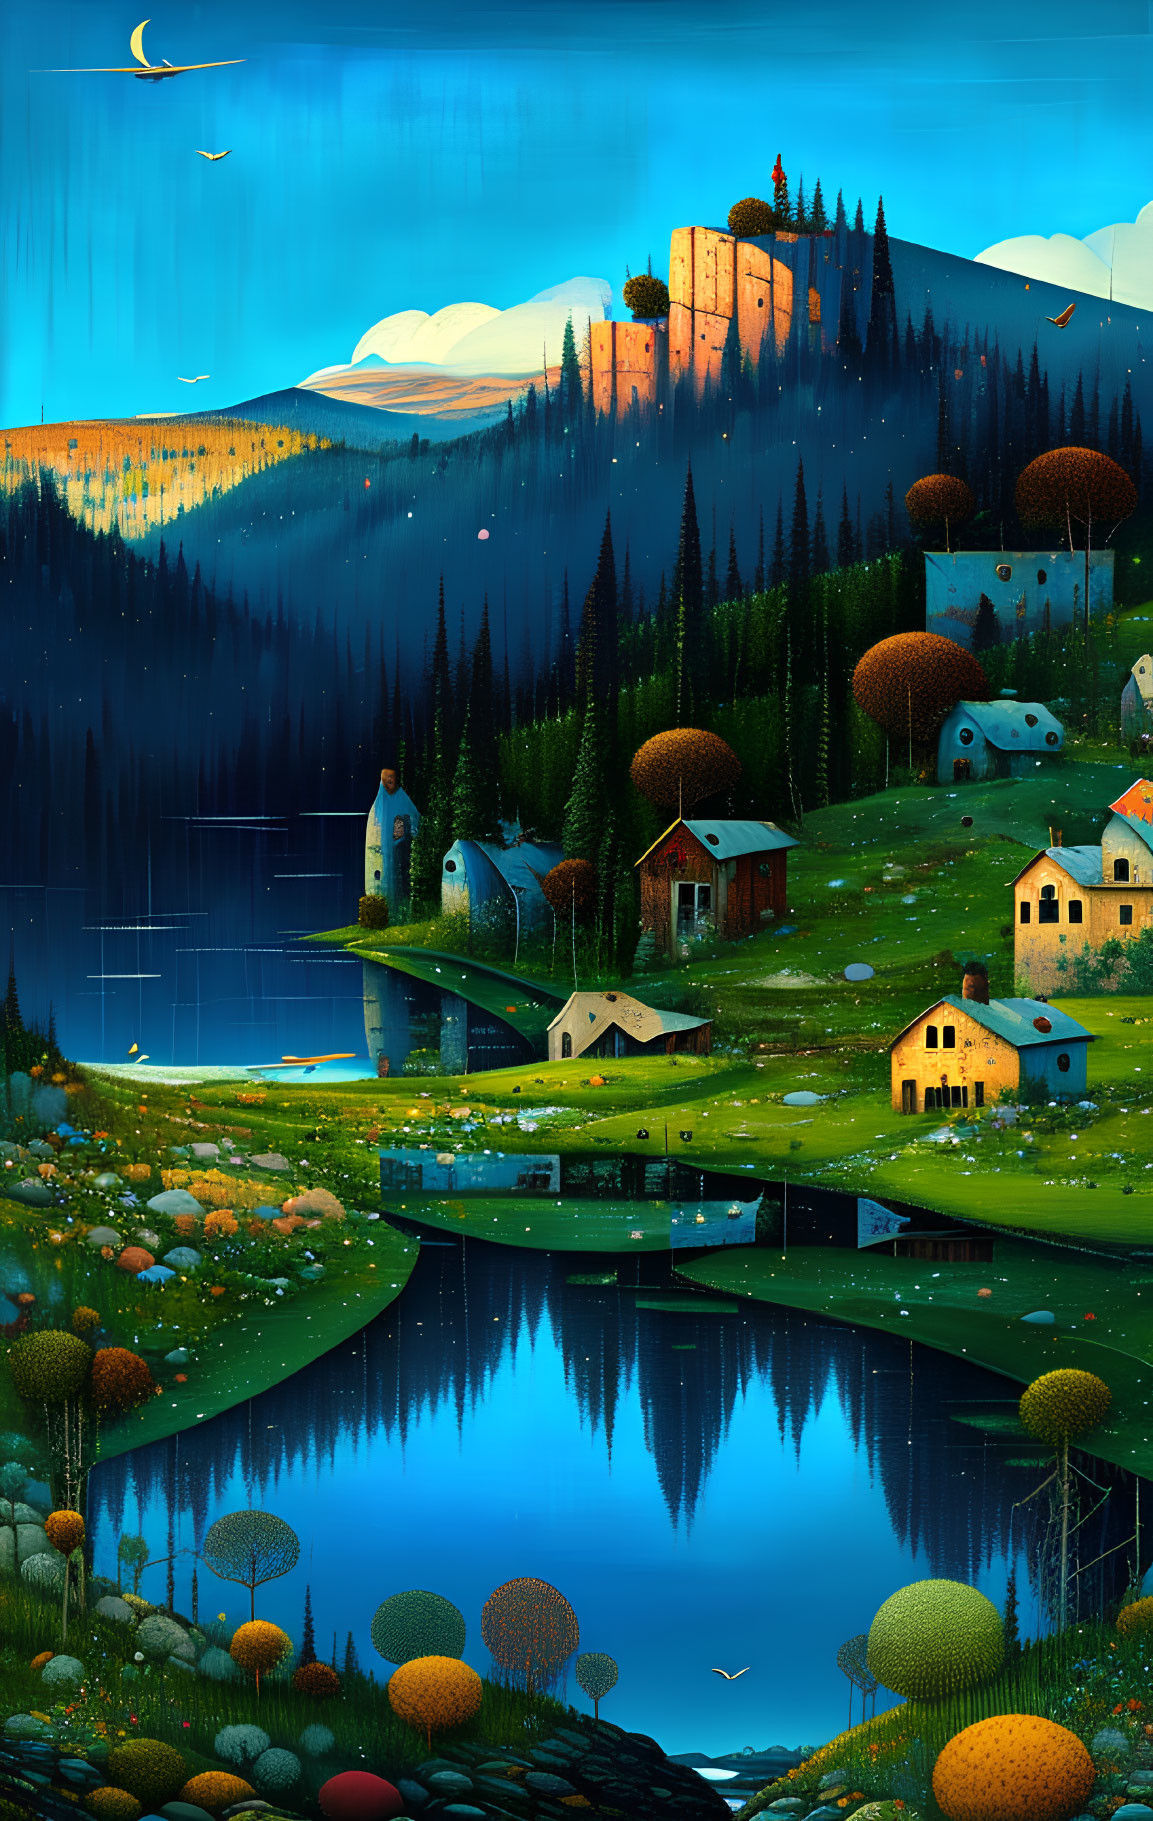 Nighttime digital artwork featuring serene lake, cozy houses, lush greenery, distant hills, and castle